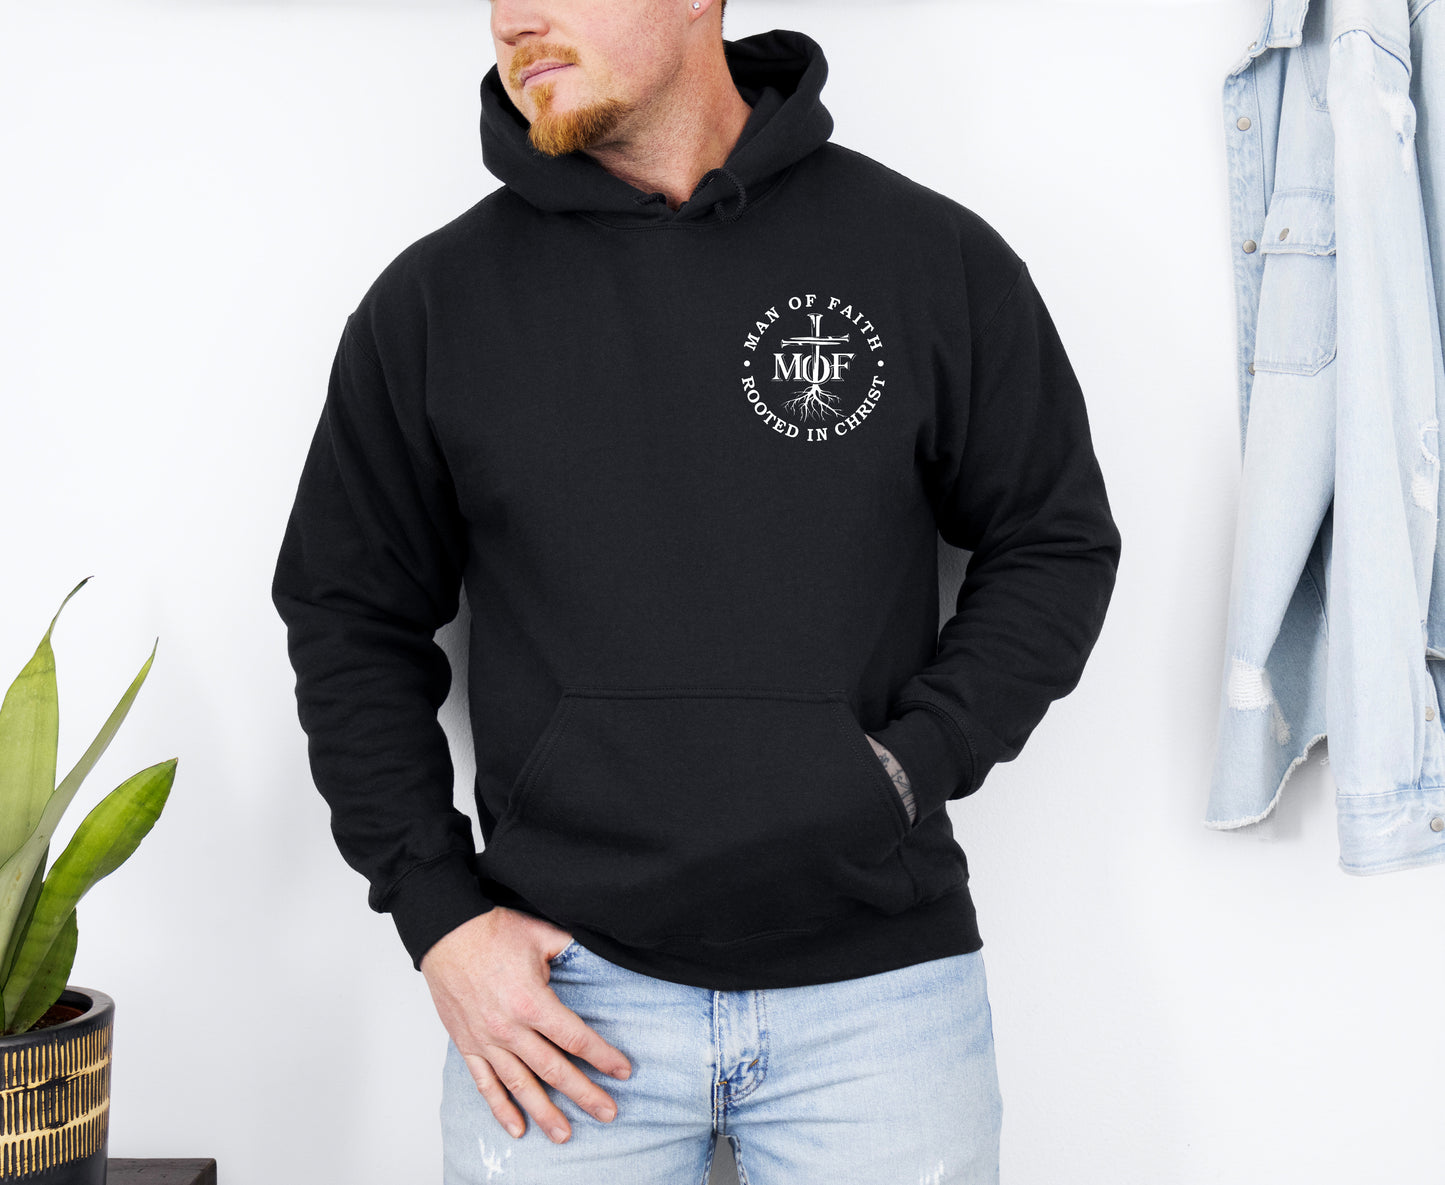 MAN OF FAITH ROOTED IN CHRIST UNISEX BLACK HOODIE